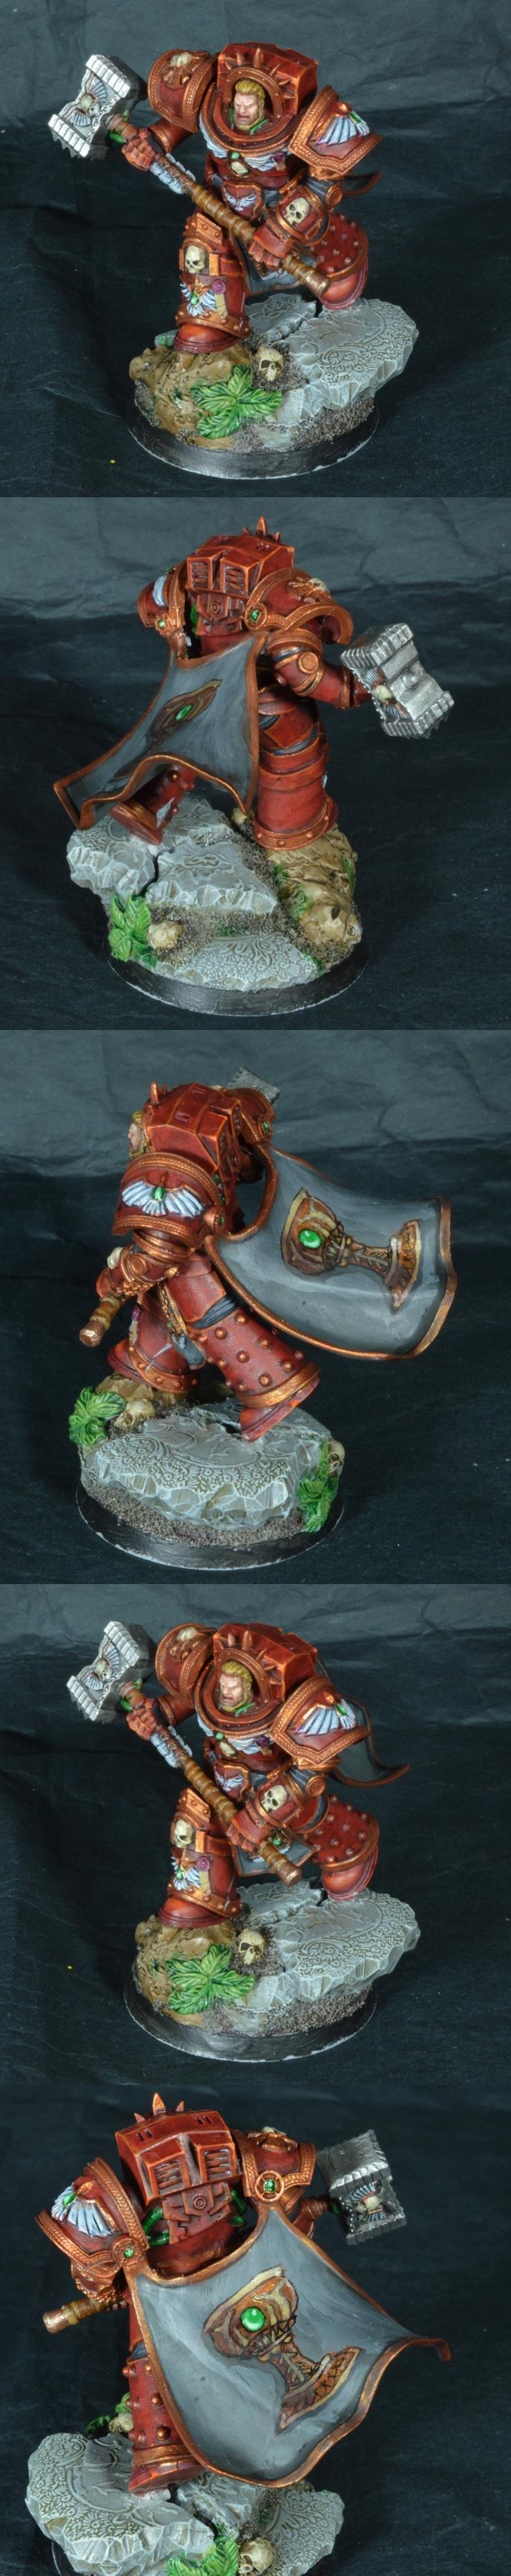 Chapter Master, Knights Sanguine, Space Marines